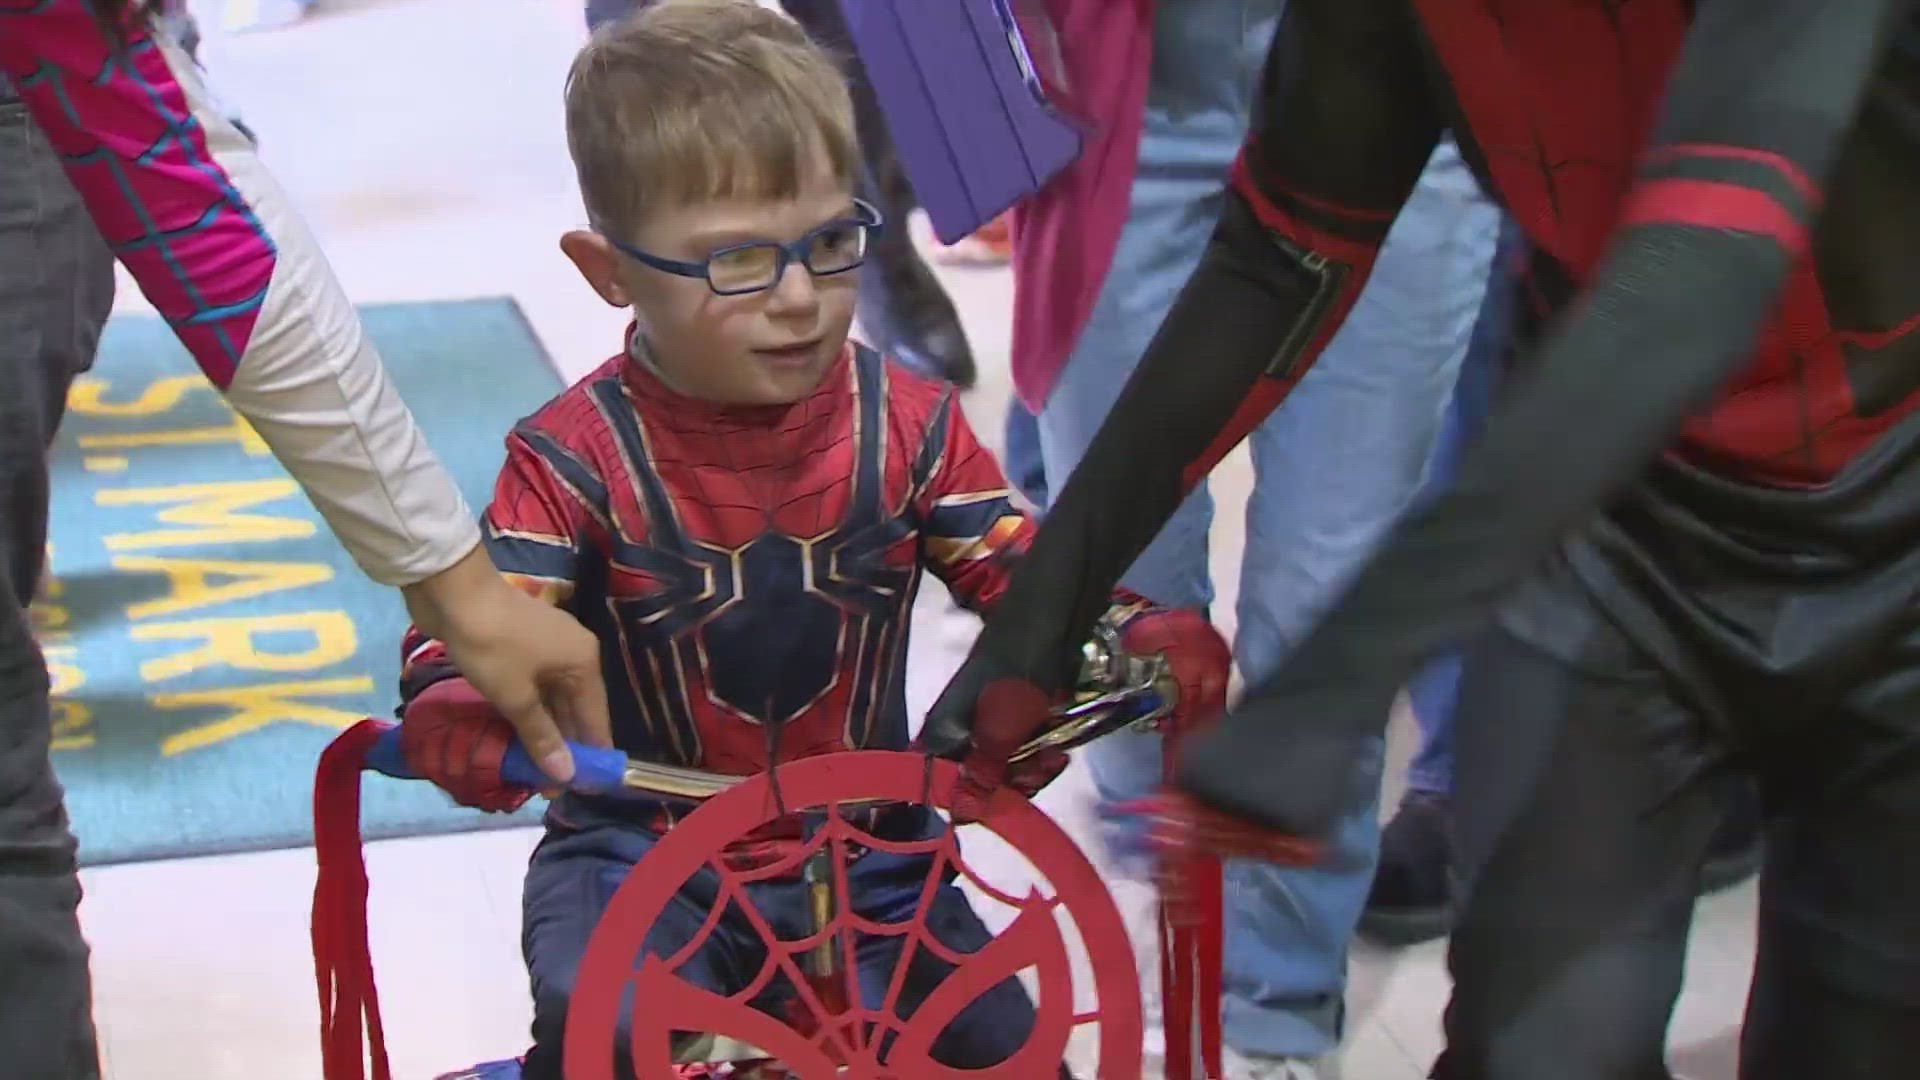 A 4-year-old boy in a Spider-Man outfit paraded through St. Mark Catholic School in Plano on Wednesday, vanquishing villains and rescuing fellow superheroes.